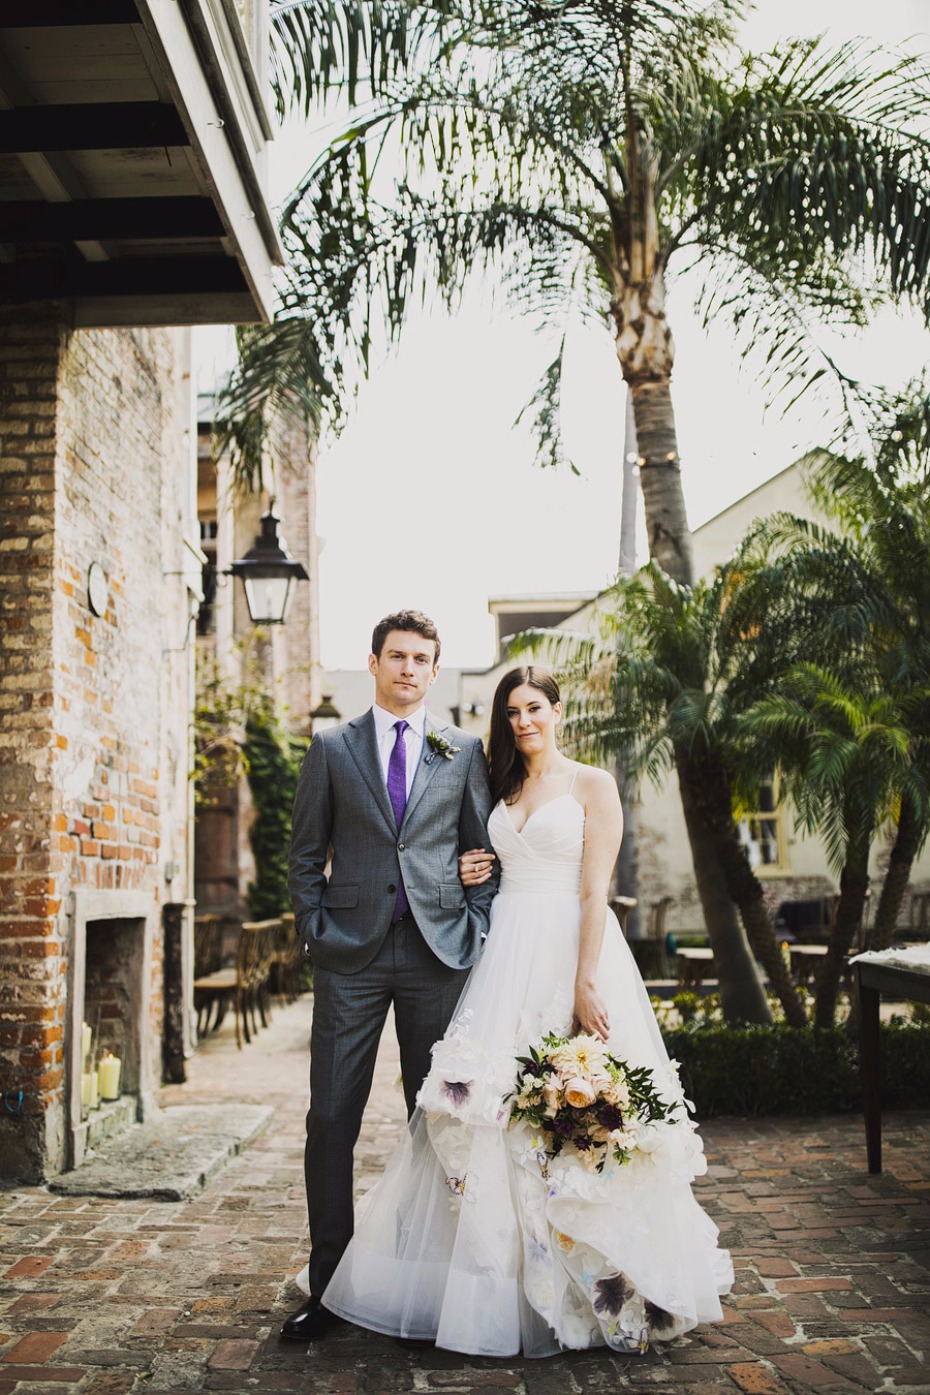 A Rustic Spring Destination Wedding in New Orleans